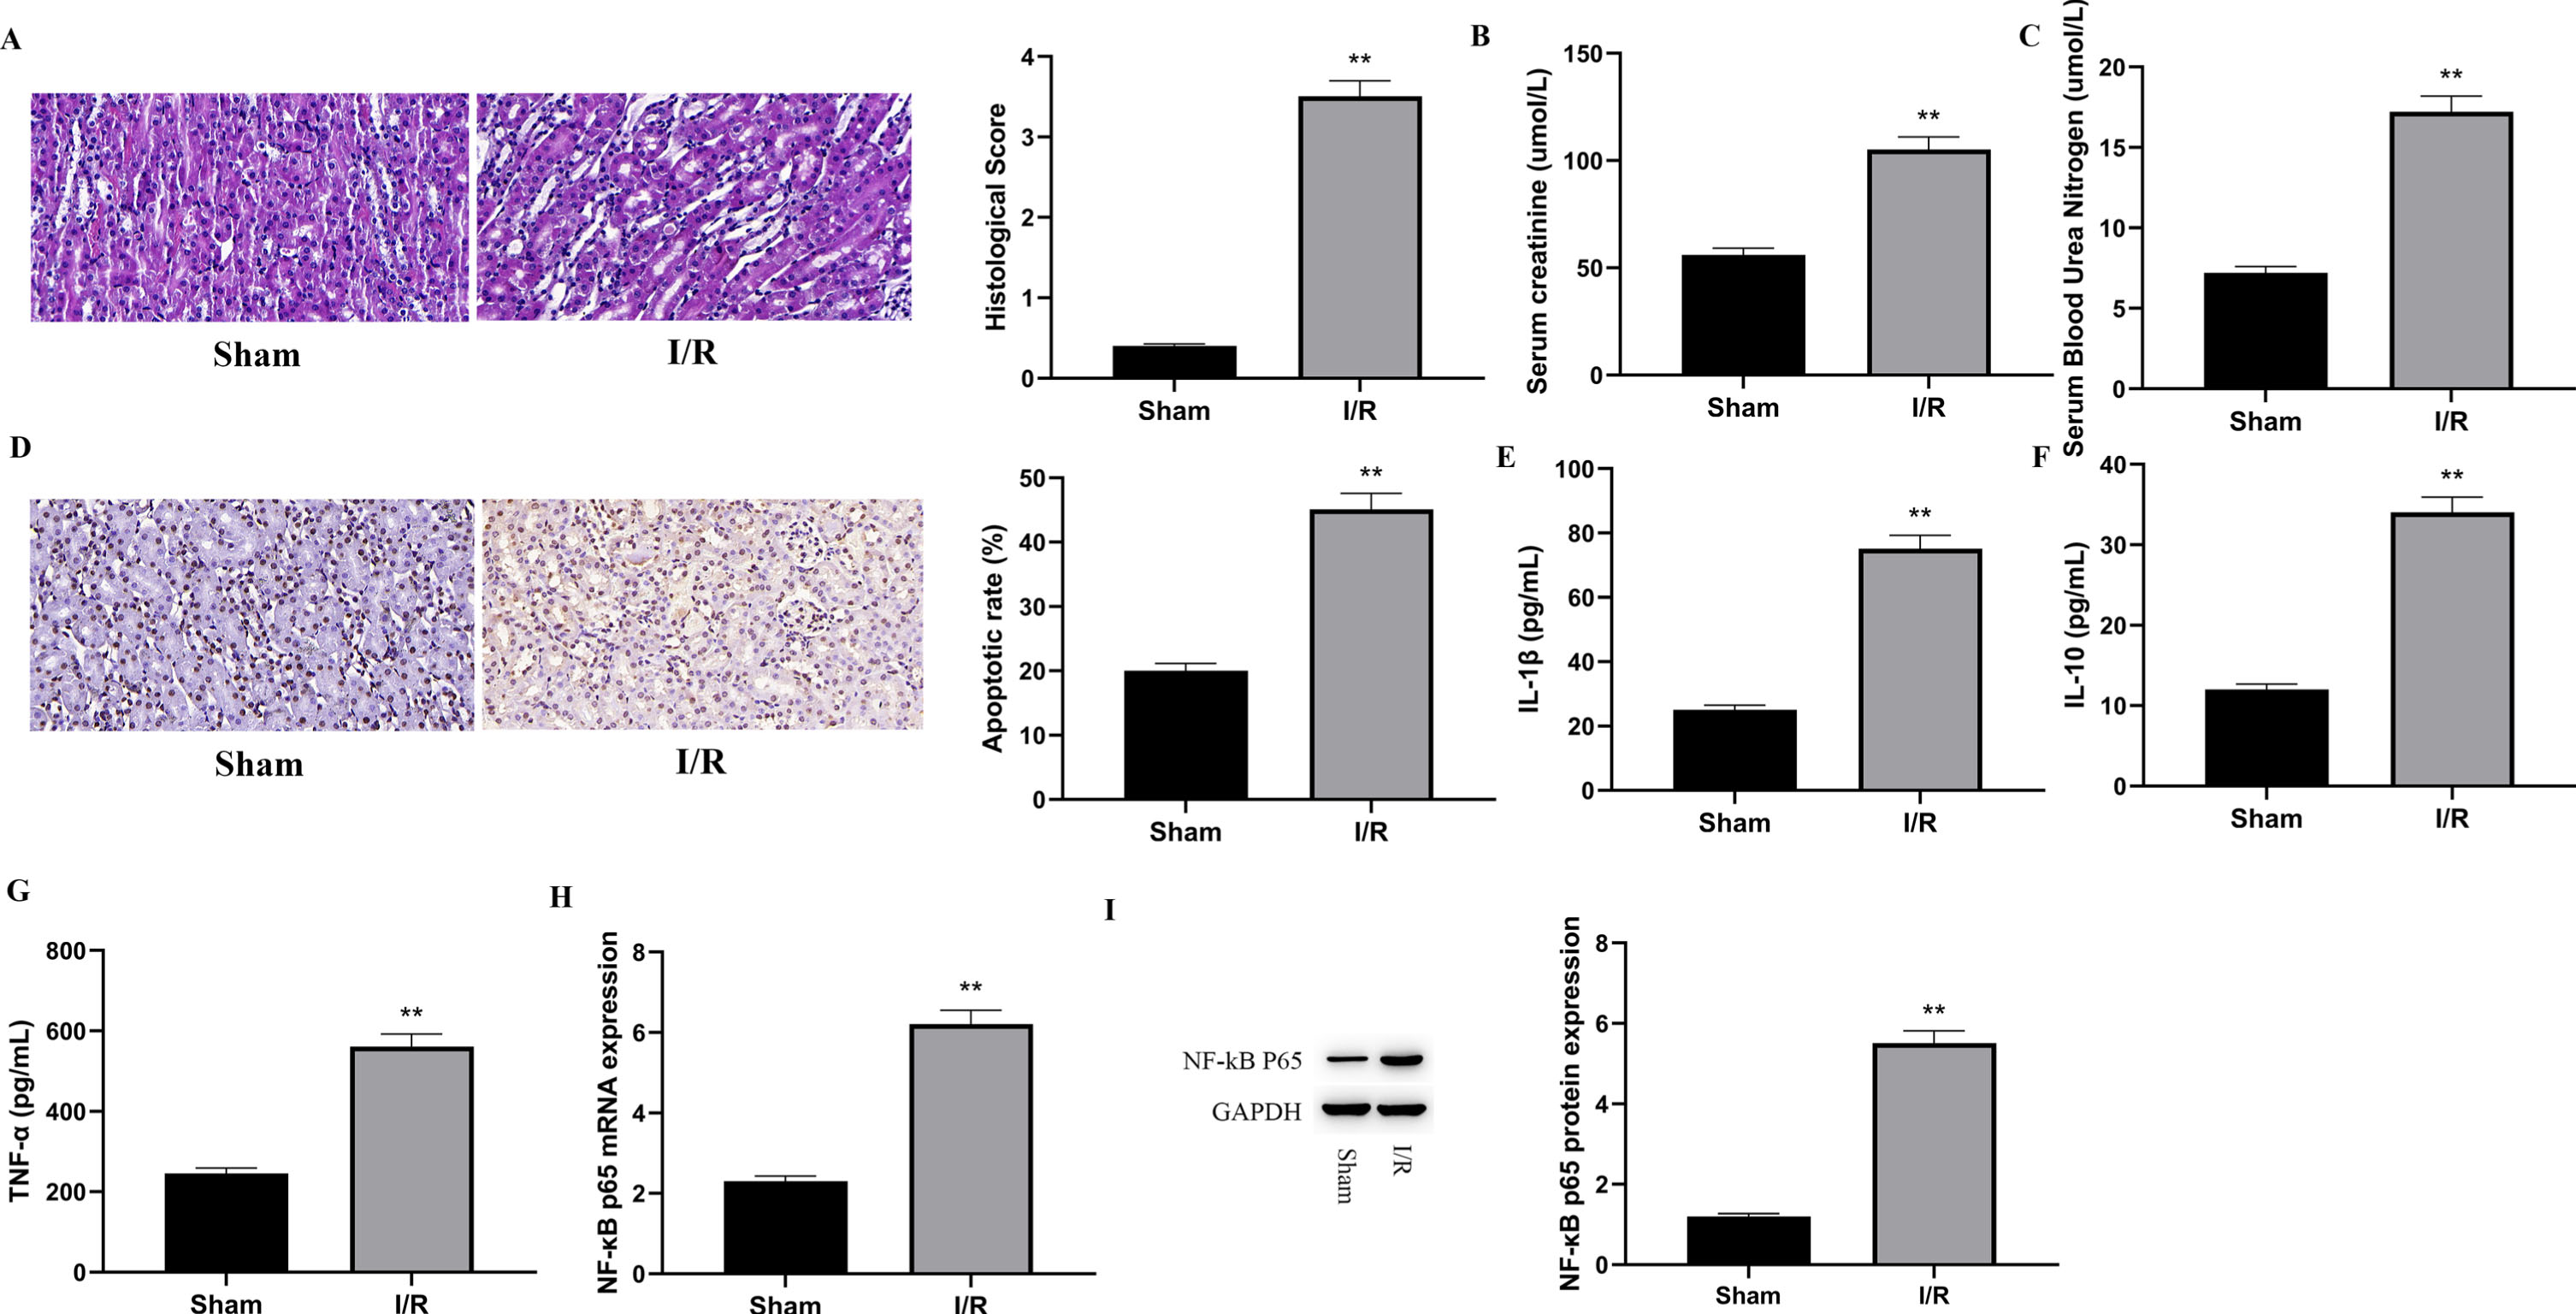 Following I/R injury, NF-kB p65 was shown to be strongly expressed in the renal tissues of rats.